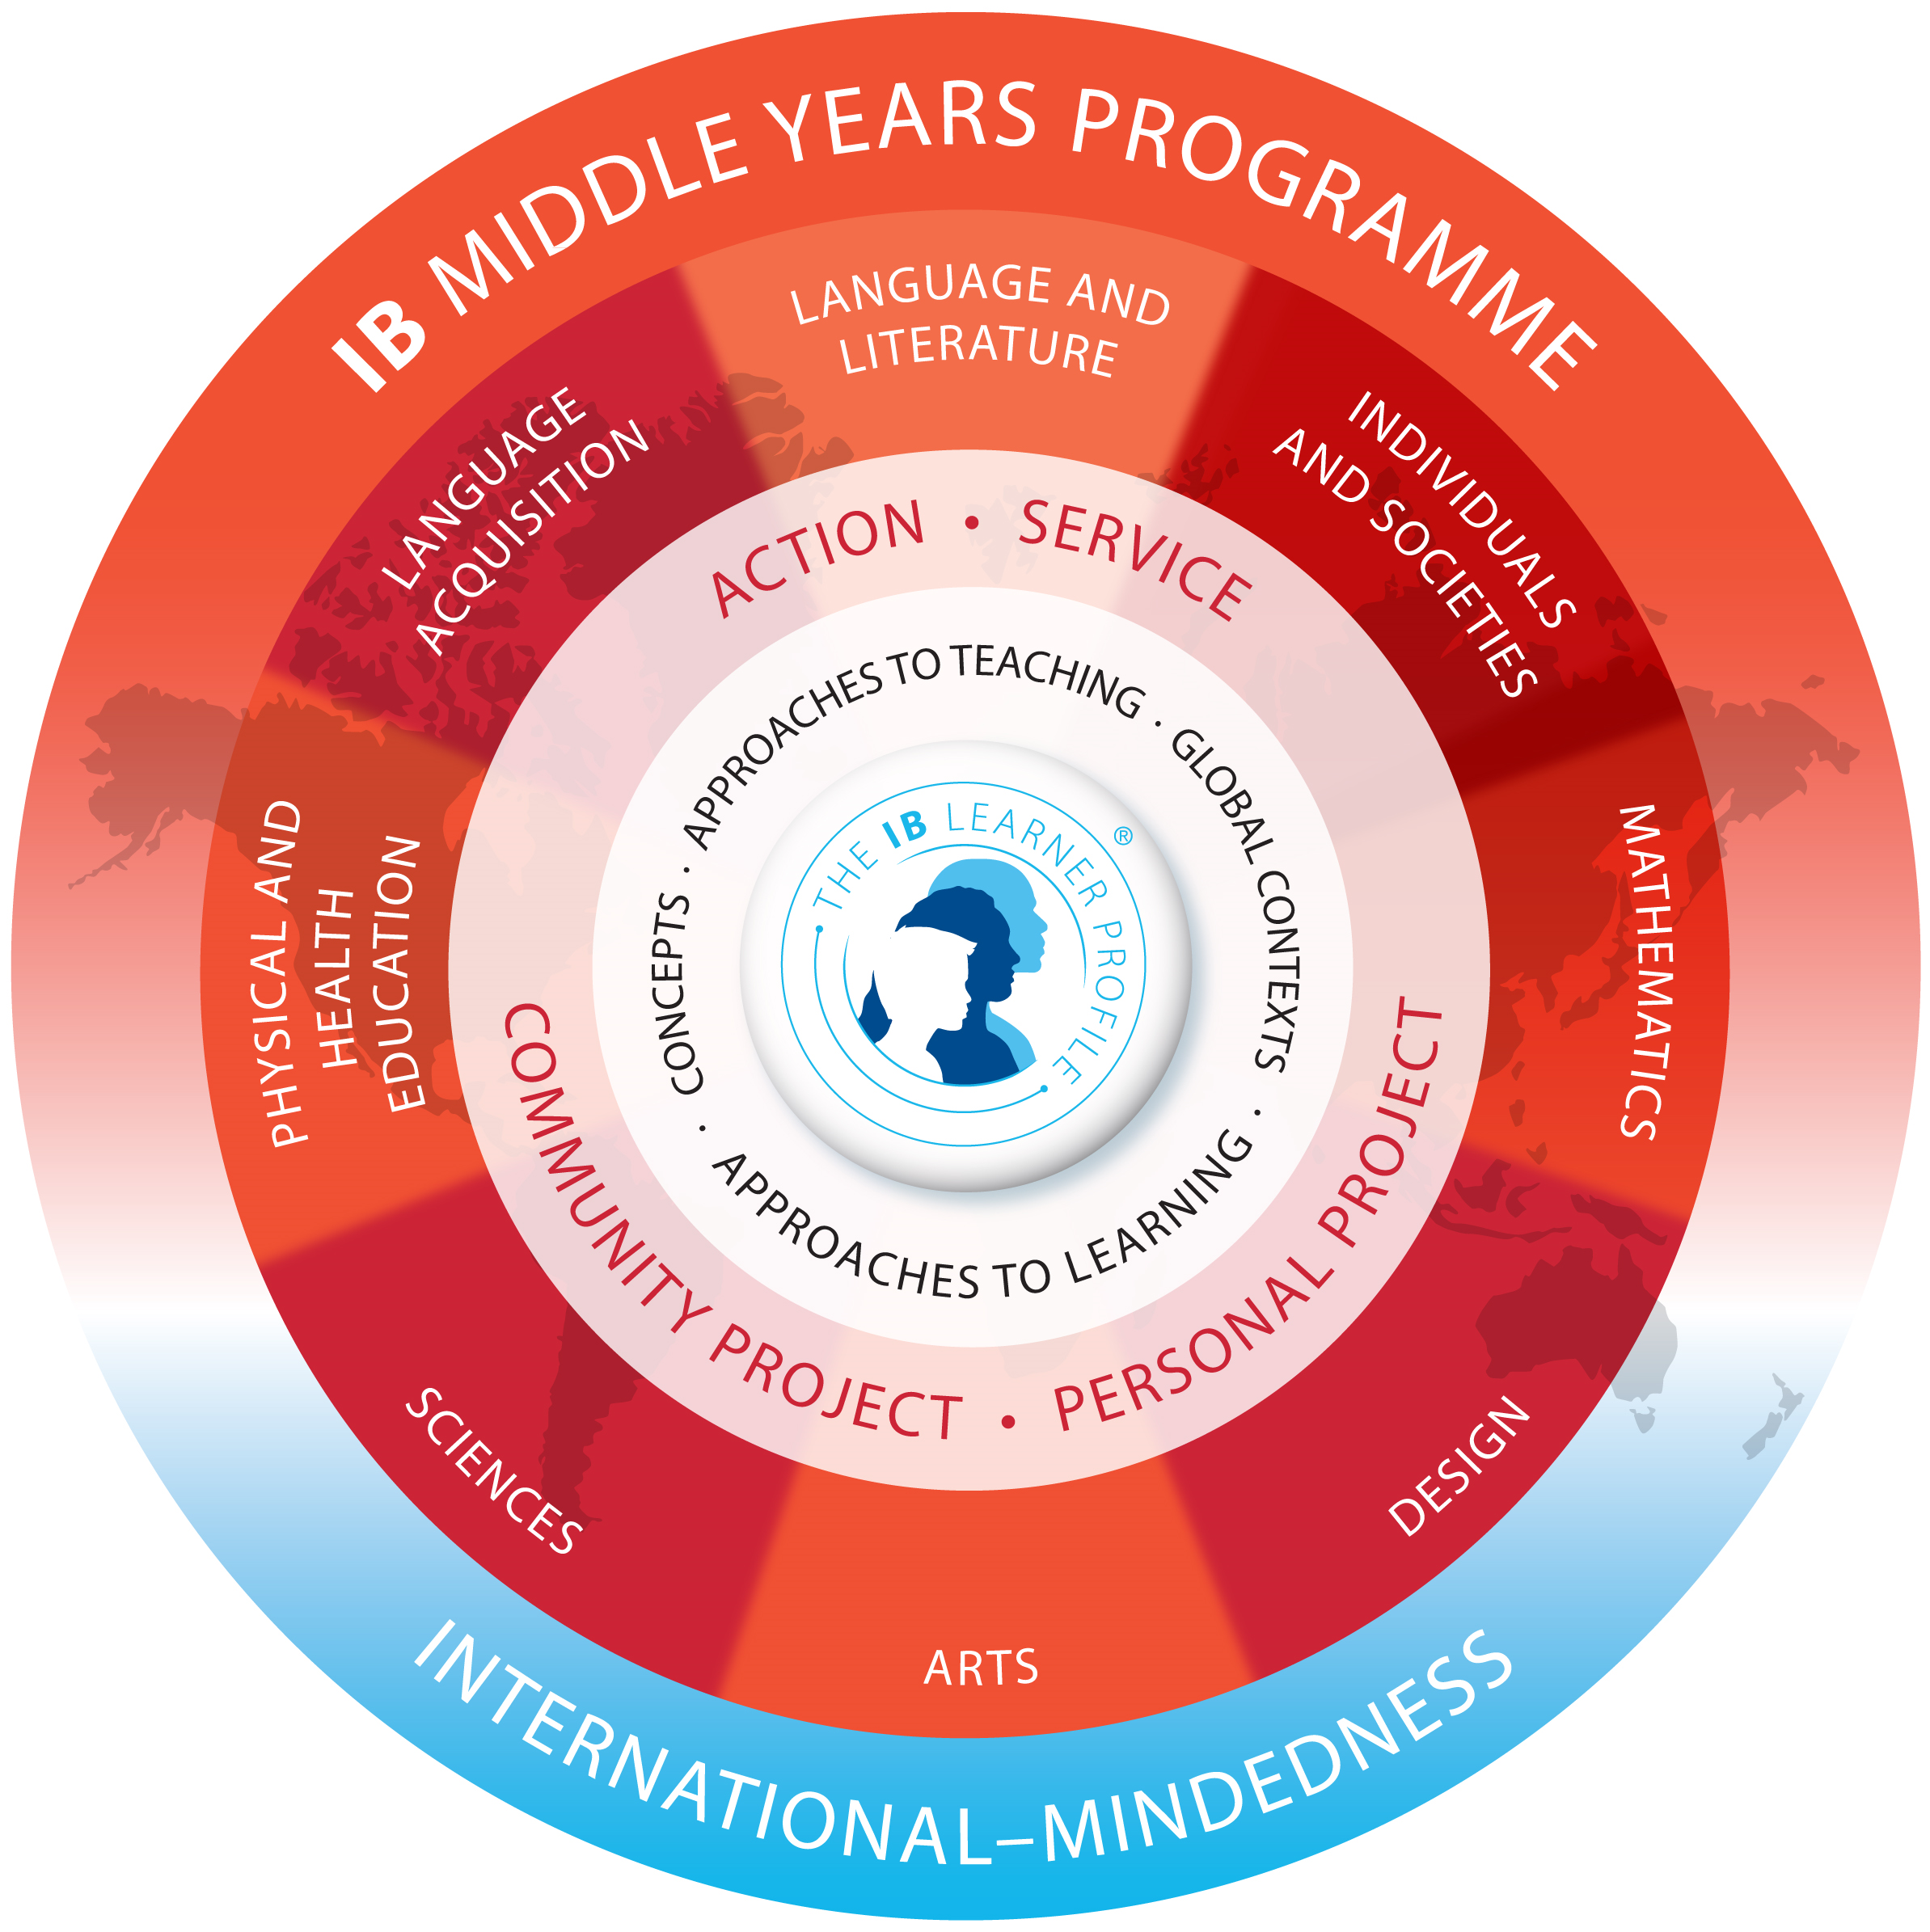 The framework for learning and teaching IB middle Years Programme